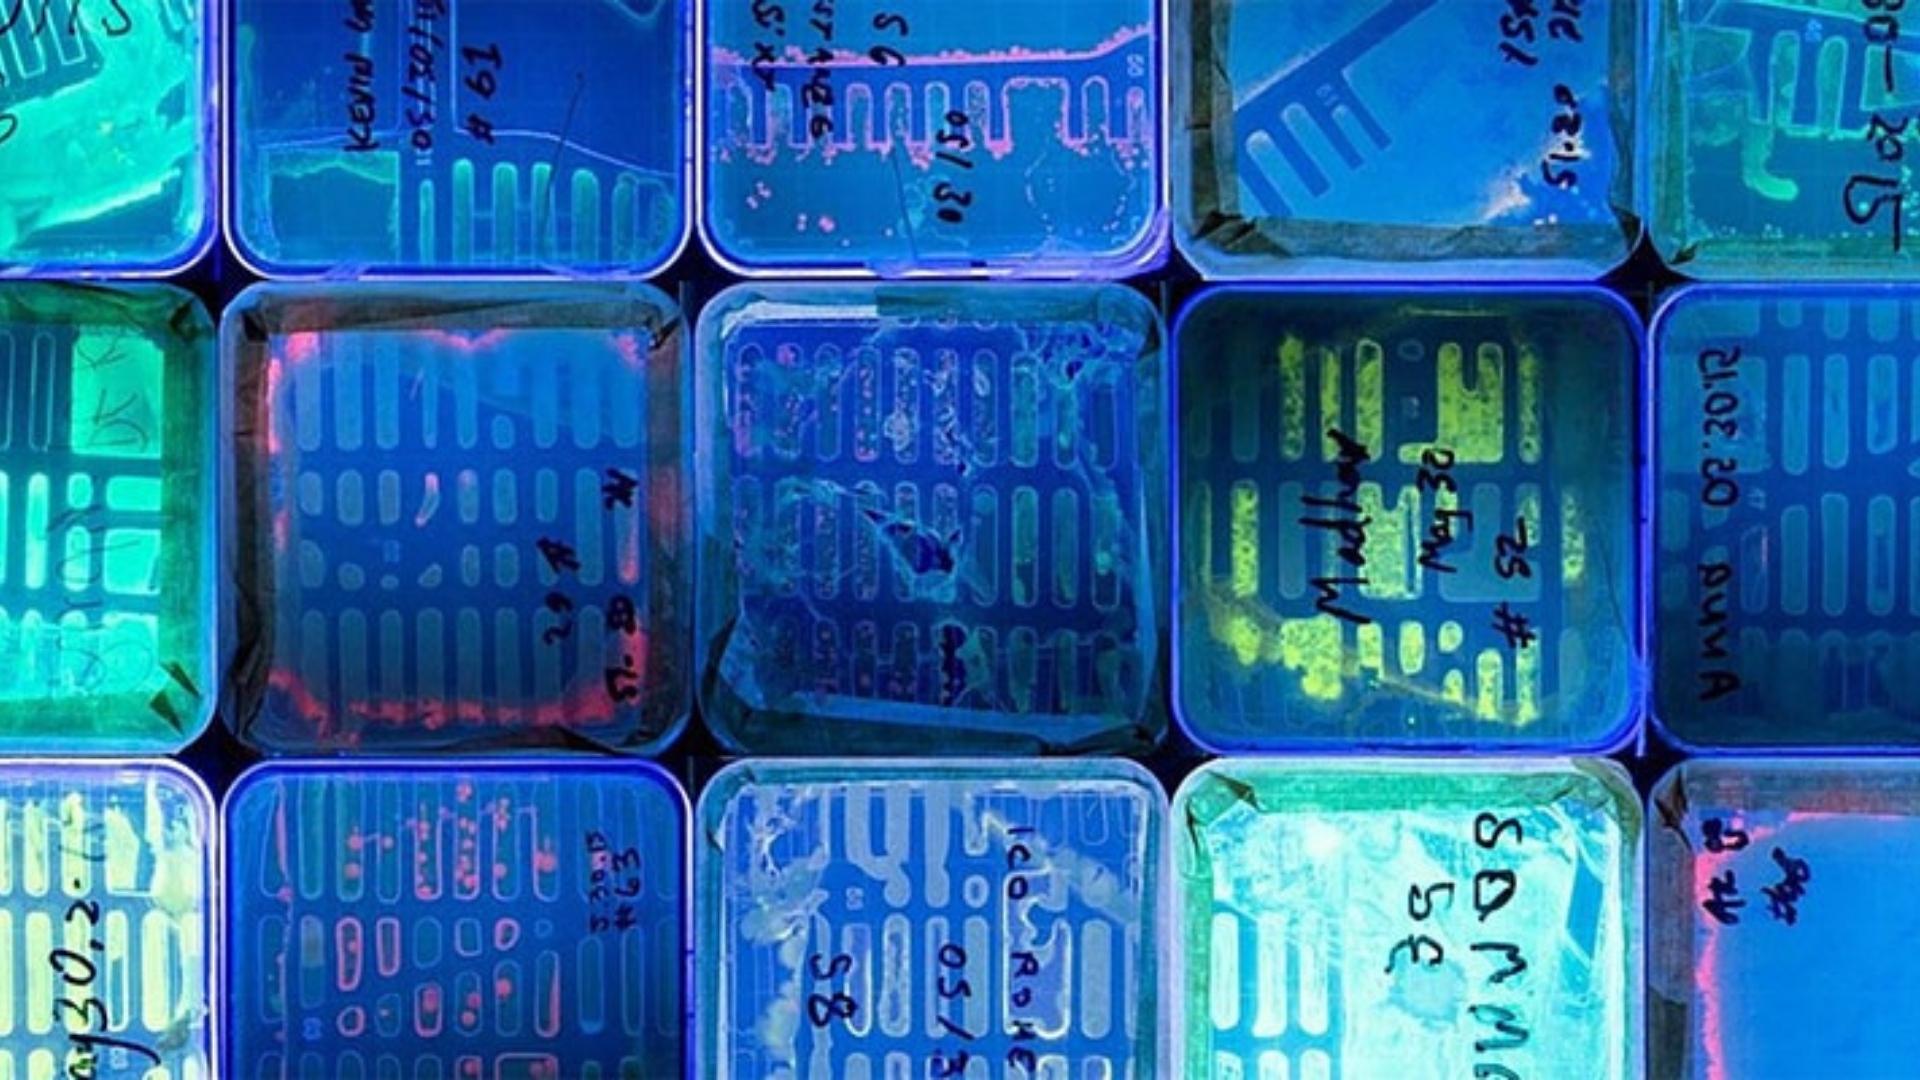 Photograph of several glowing agar plates arranged to look like Manhattan